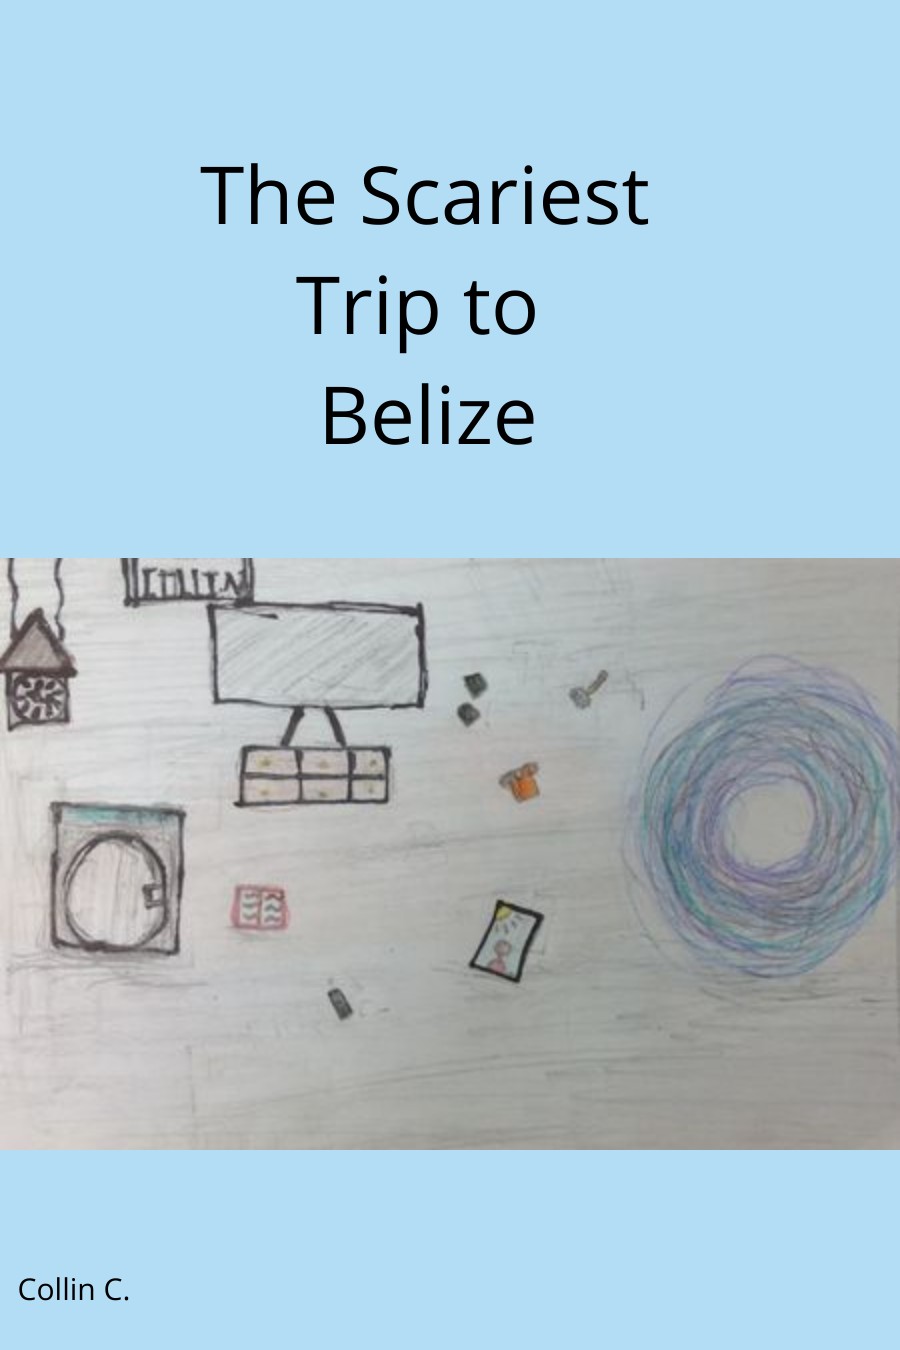 The Scariest Trip to Belize by Collin C.